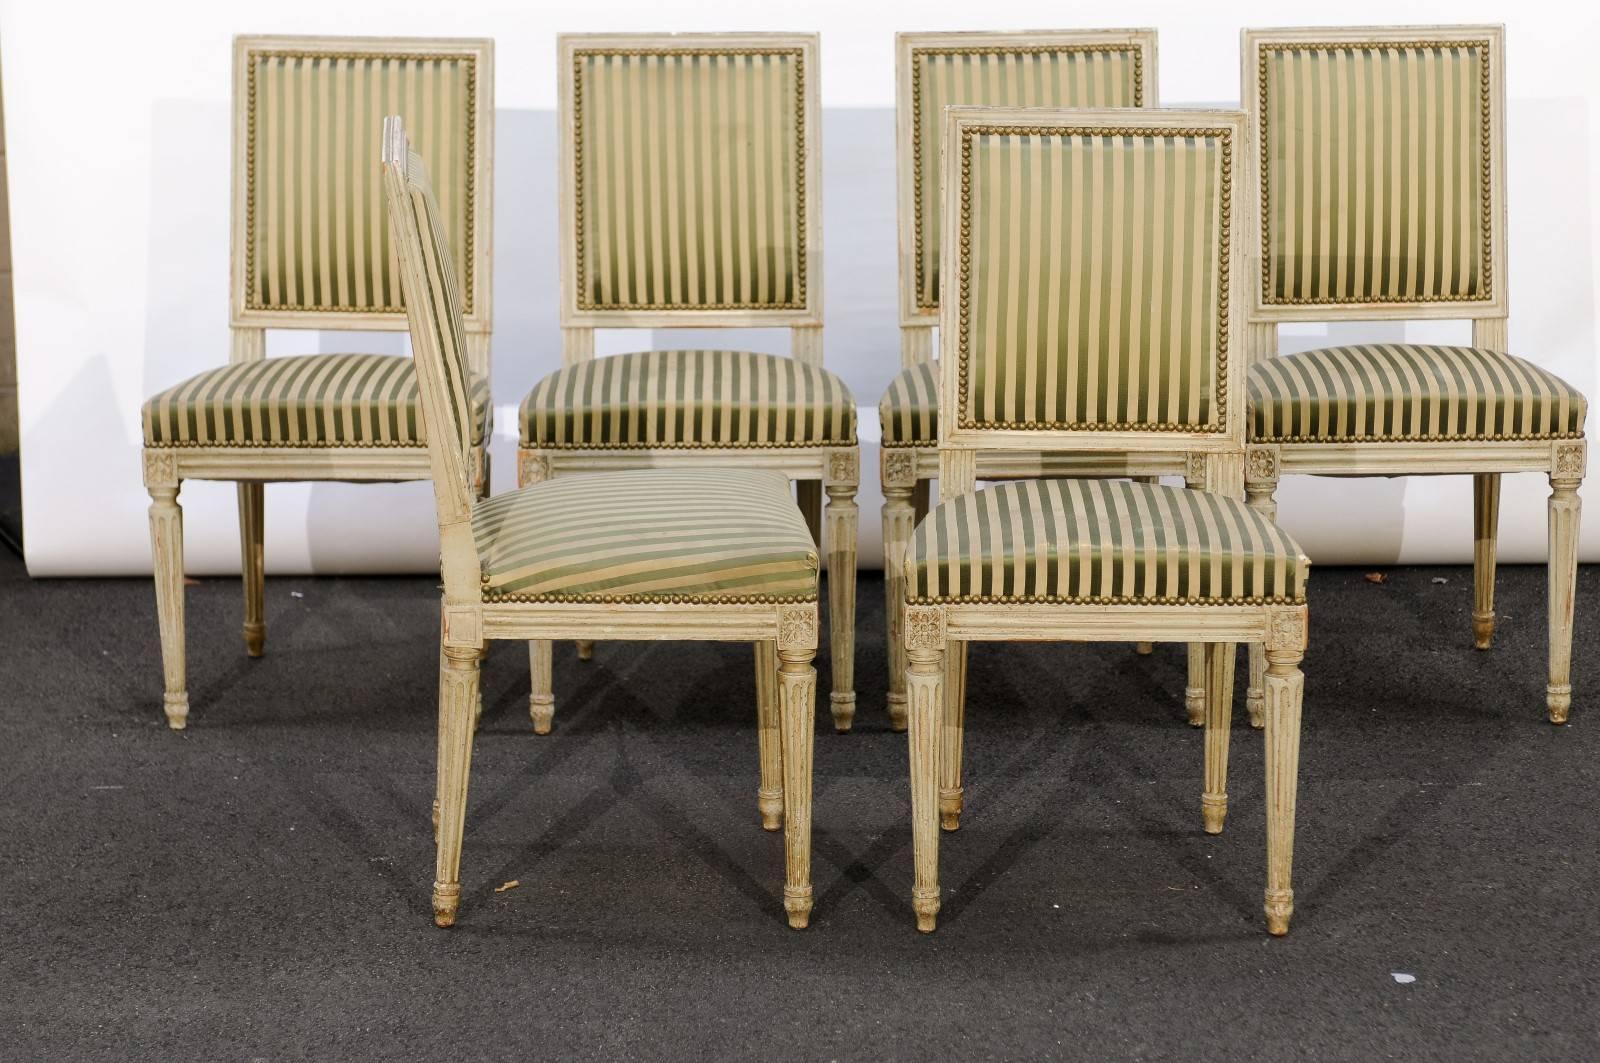 20th Century Set of Six French Louis XVI Style Painted Wood Dining Chairs, circa 1900